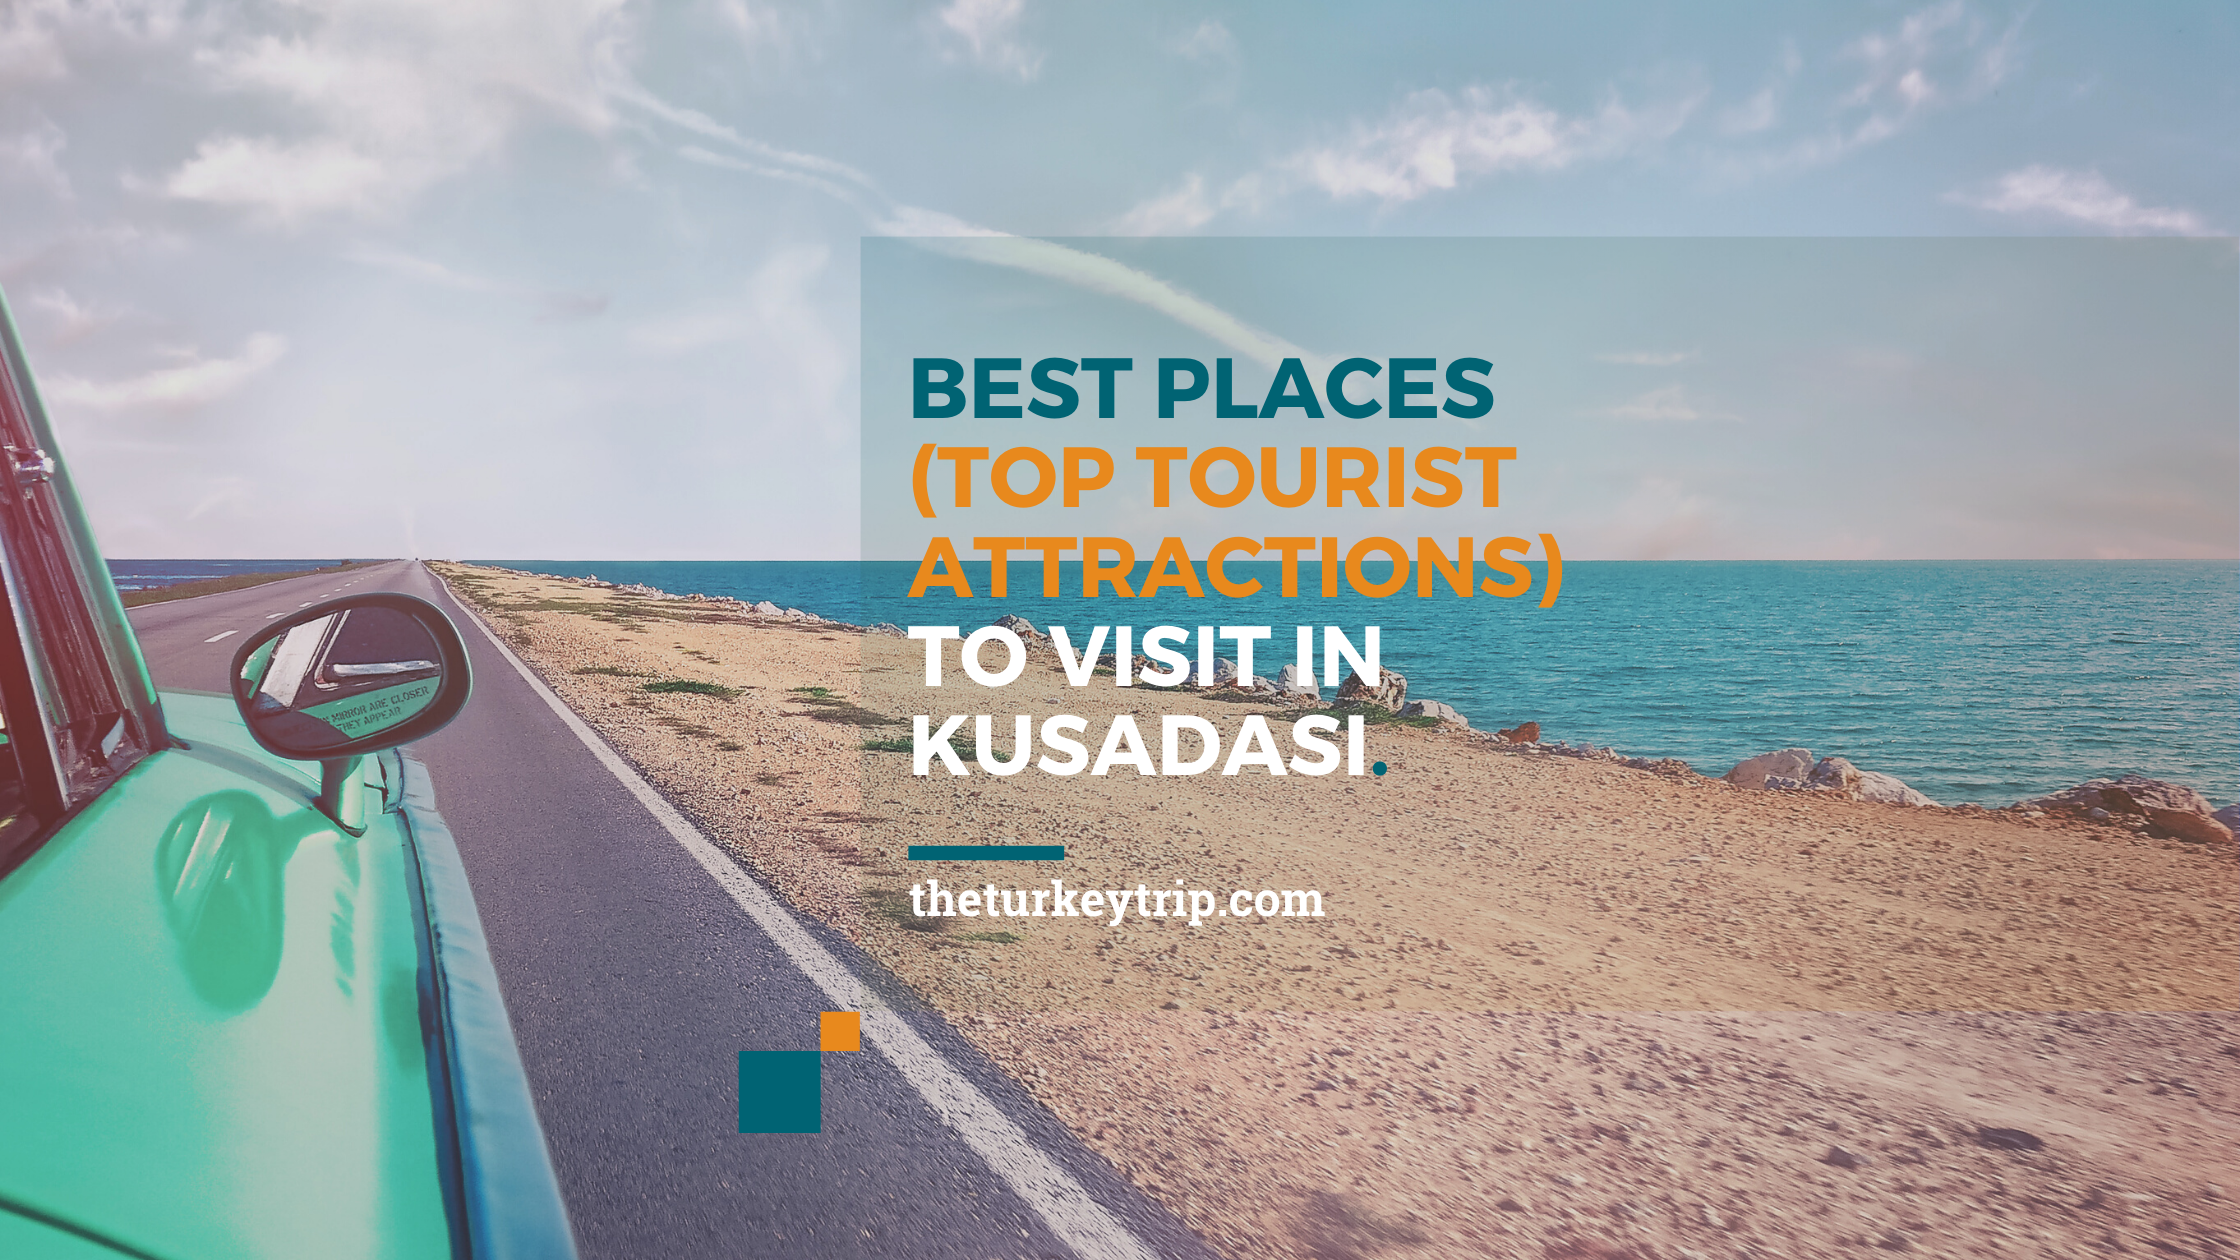 Best Places (Top Tourist Attractions) To Visit In Kusadasi Turkey